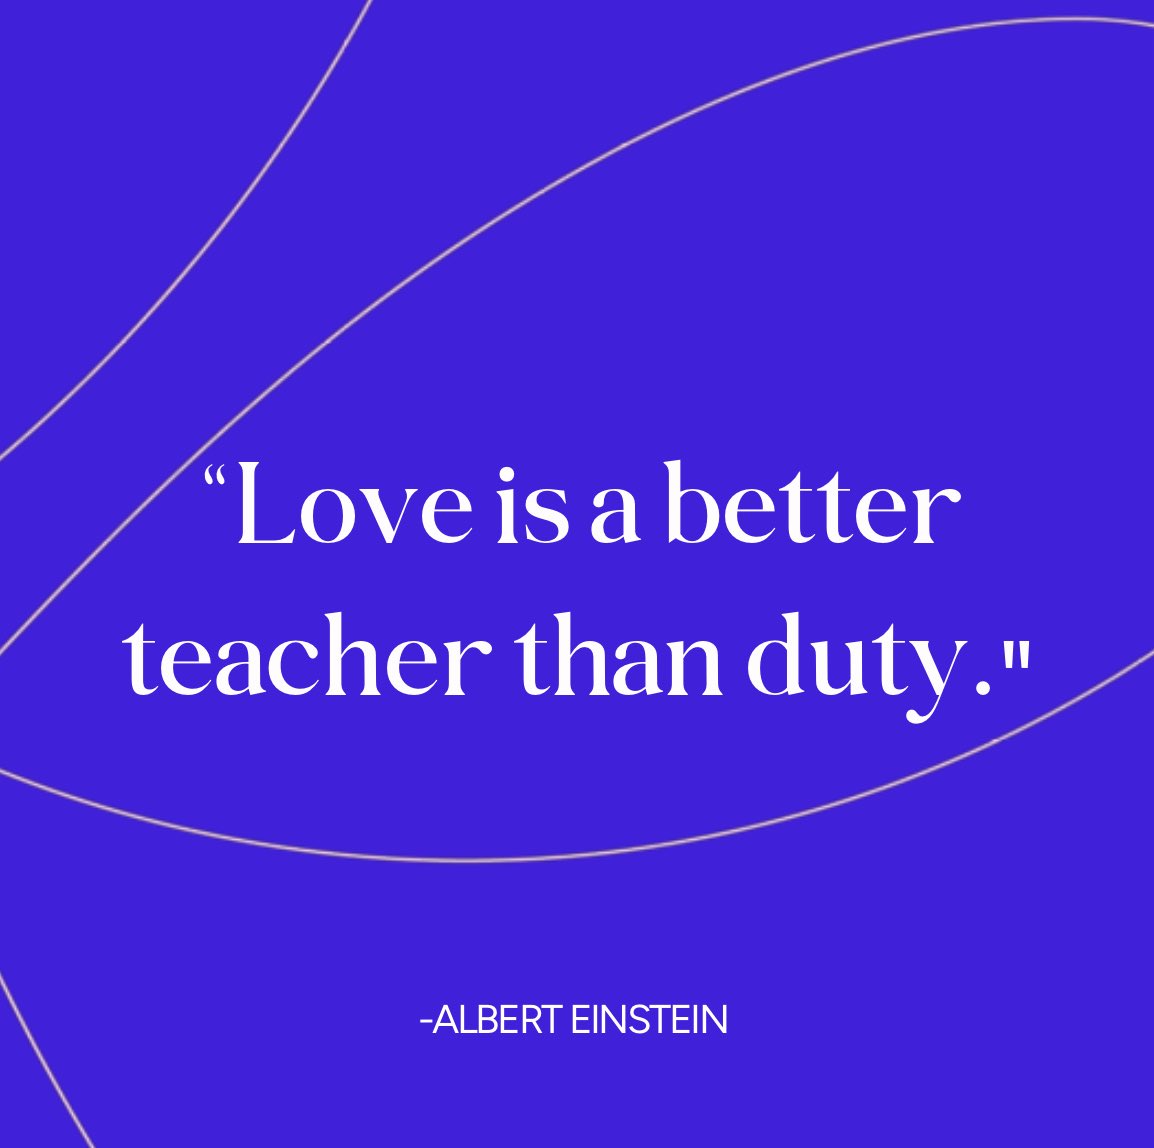 Lessons in love often teach you most about yourself. Embrace the wisdom of the heart and connect deeper! #DeeperConnections #LessonsInLove